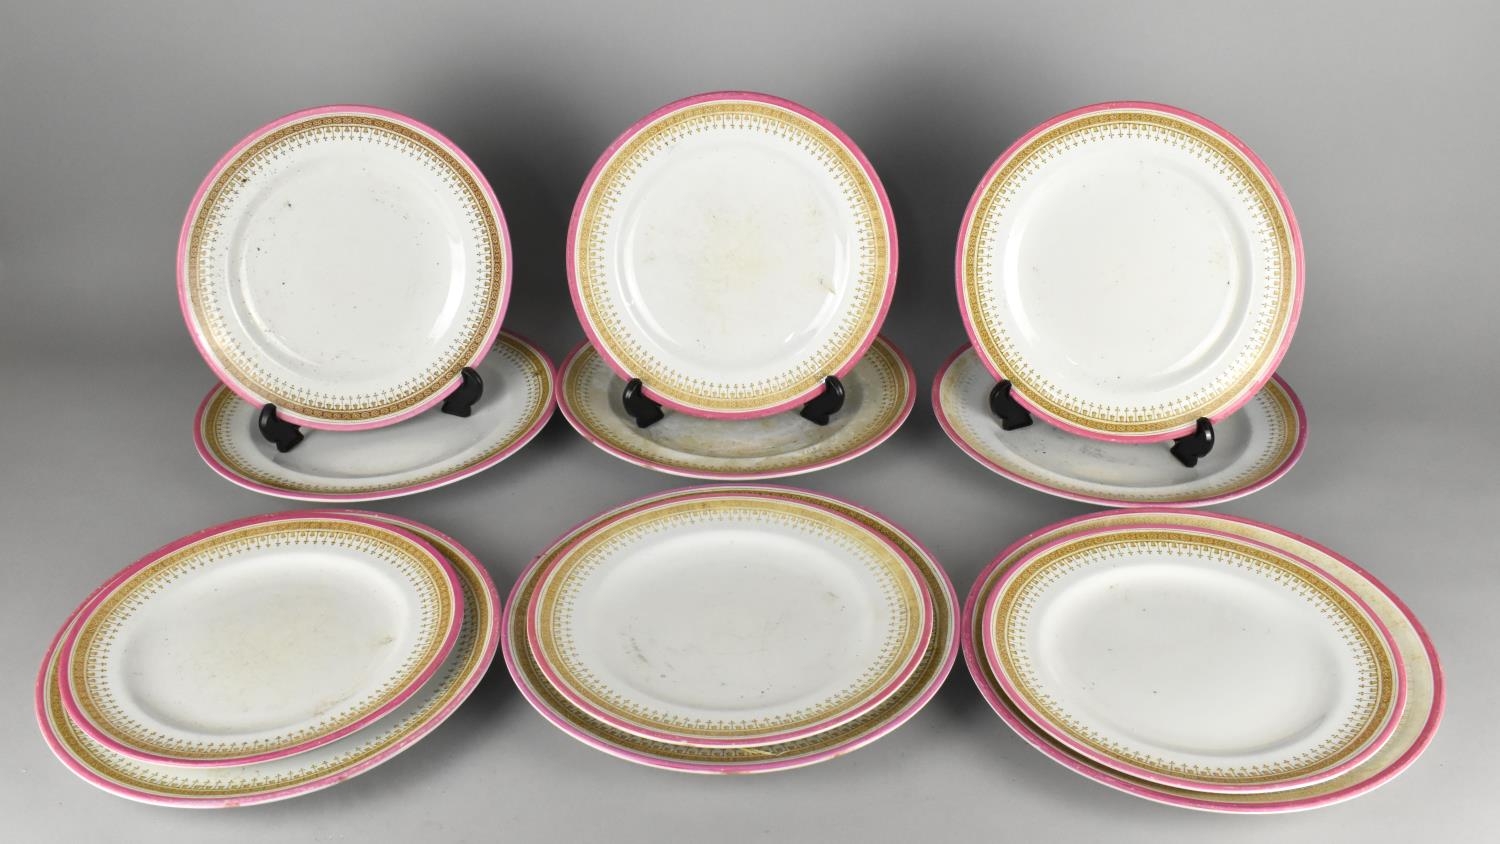 A Set of Six Late 19th,Early 20th Century Small and Six Large Royal Worcester Plates Decorated